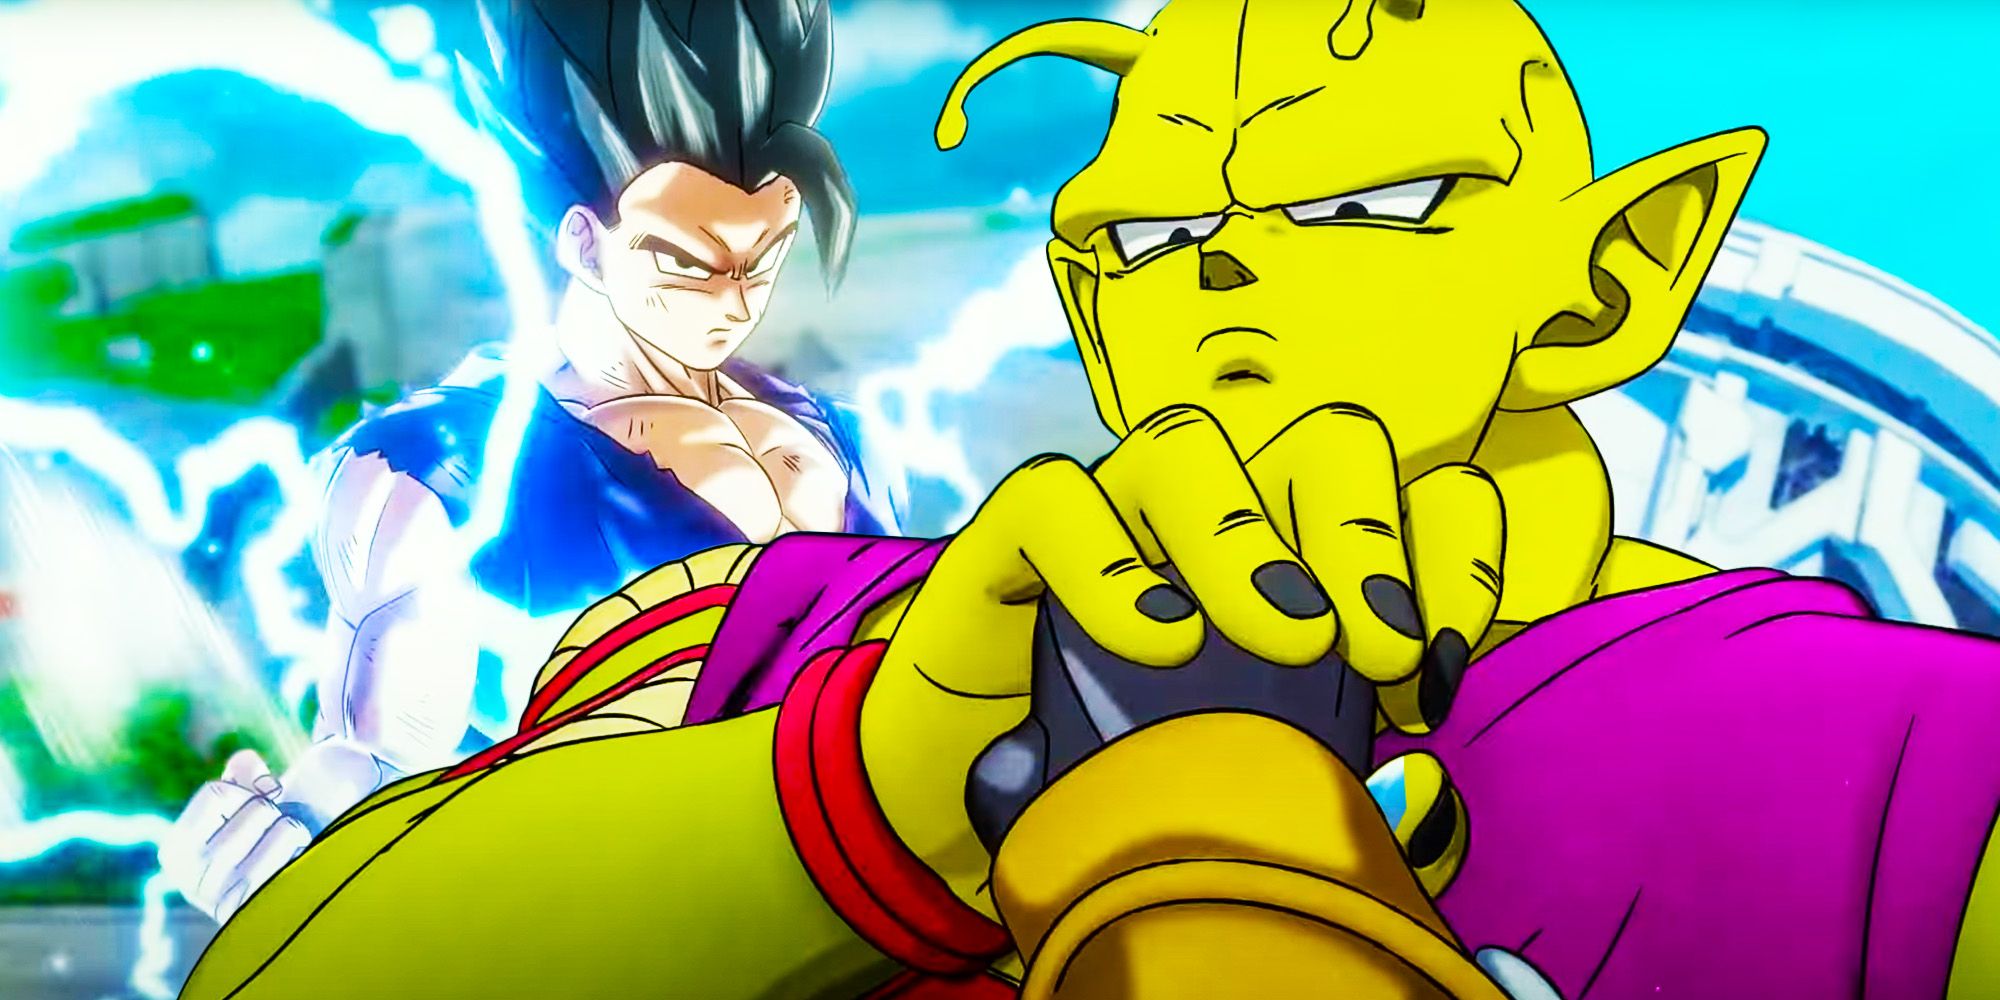 Where Should Dragon Ball Super Go Now After Super Hero?